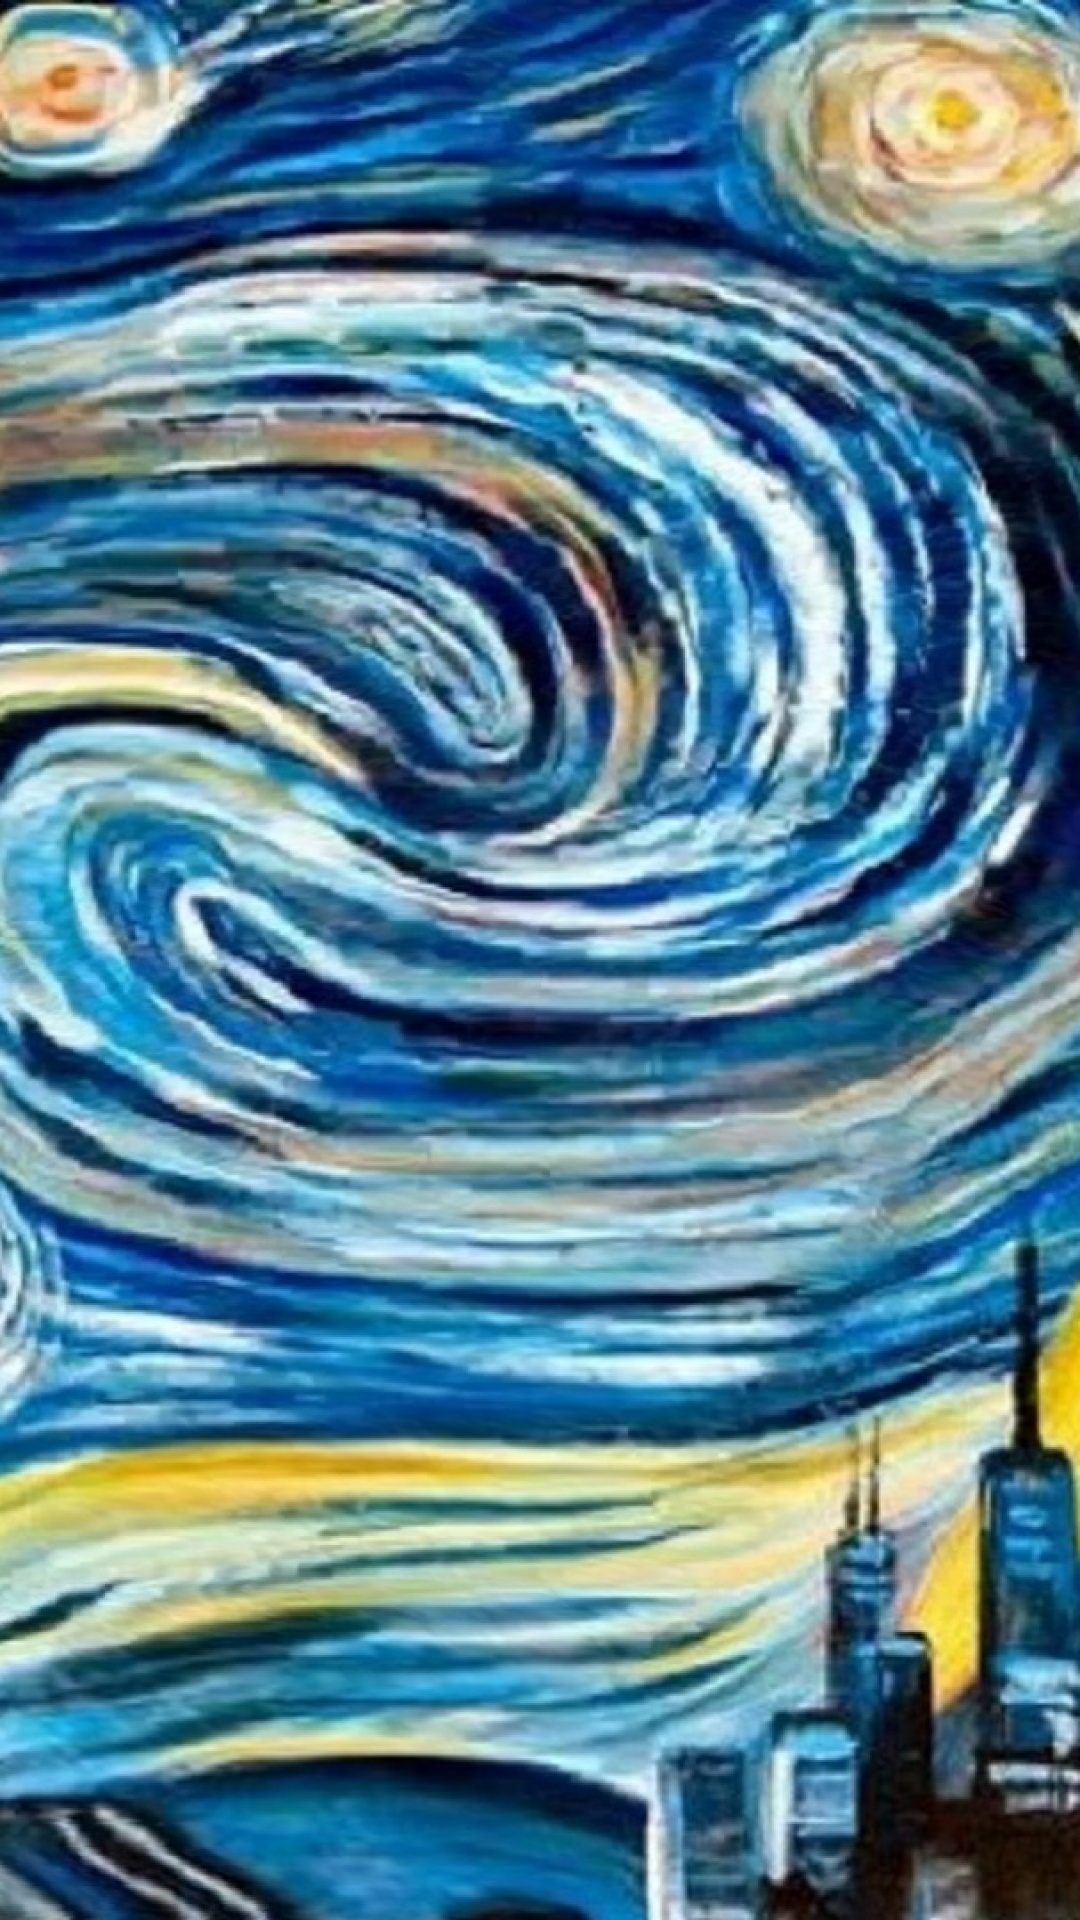 Starry Night Iphone 5 Wallpapers Group - Iphone Wallpaper Van Gogh Starry Night - HD Wallpaper 